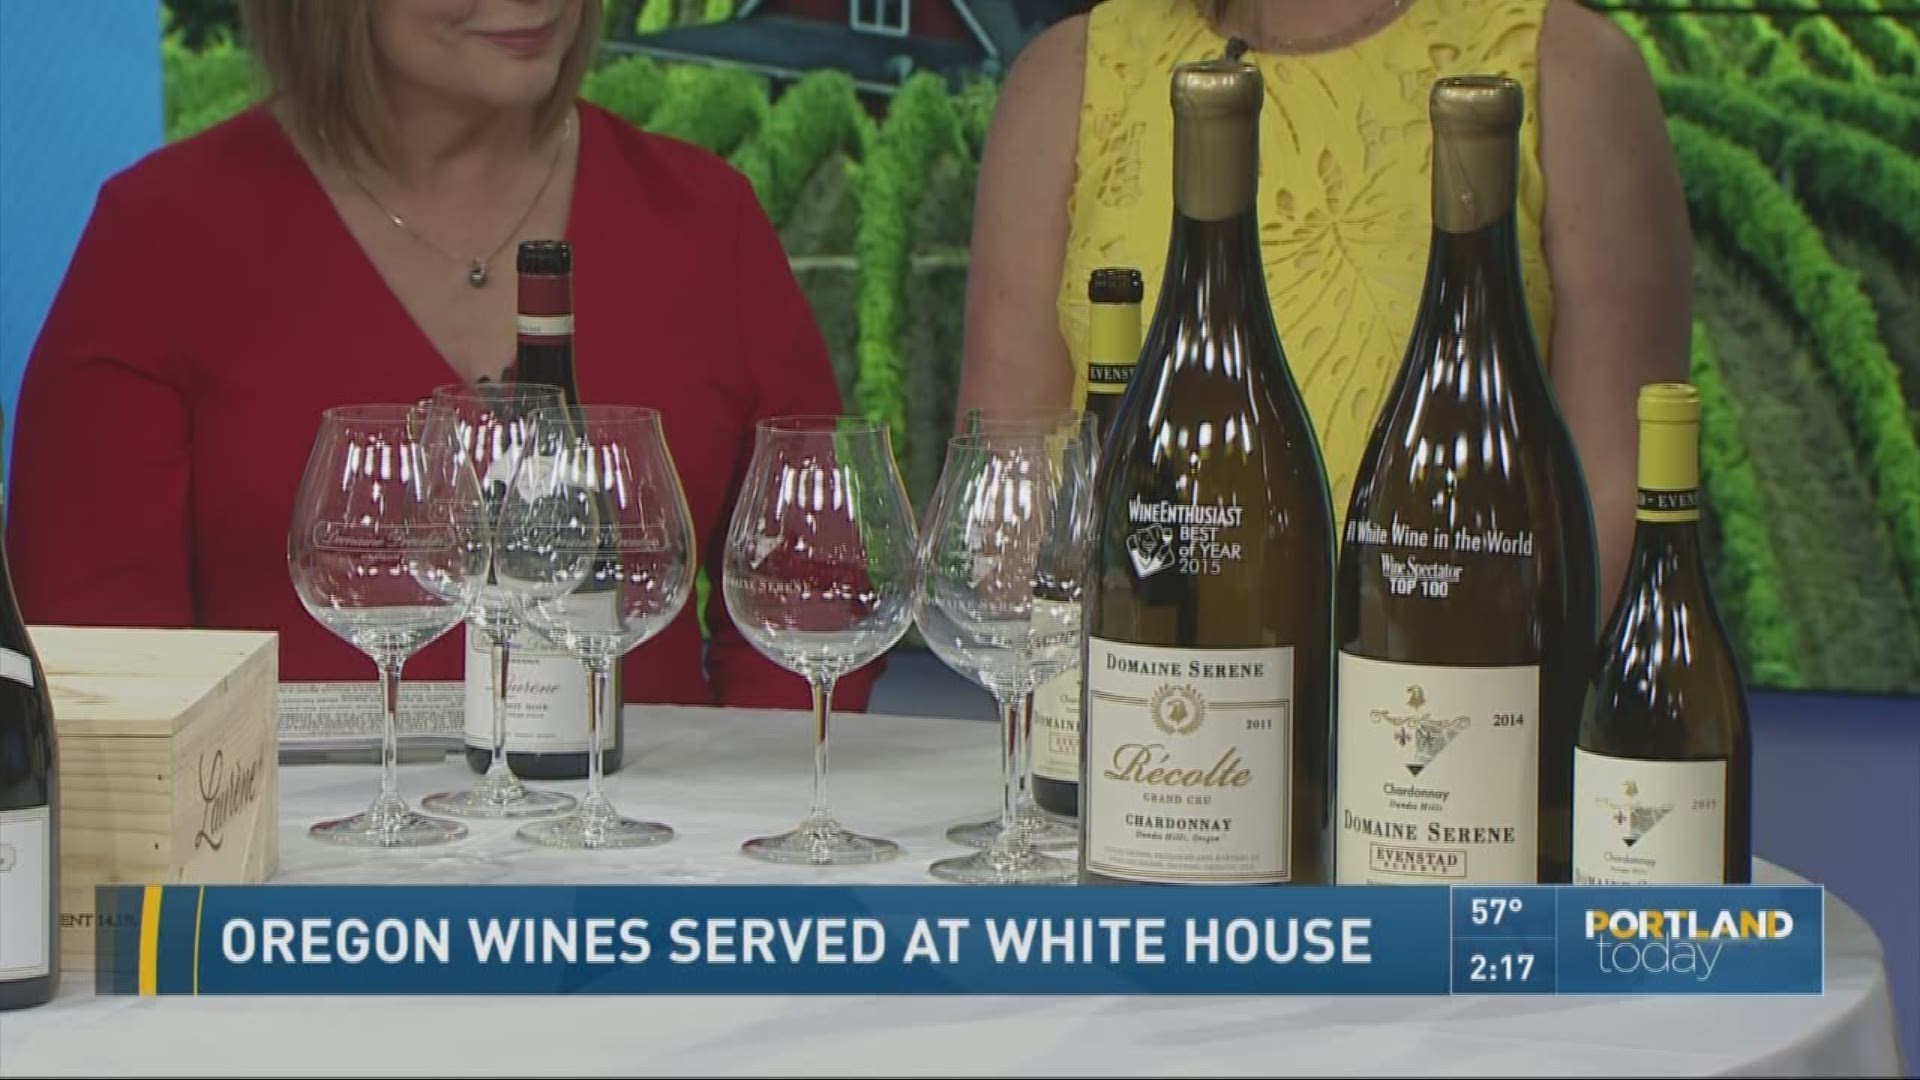 Oregon wines served at the White House